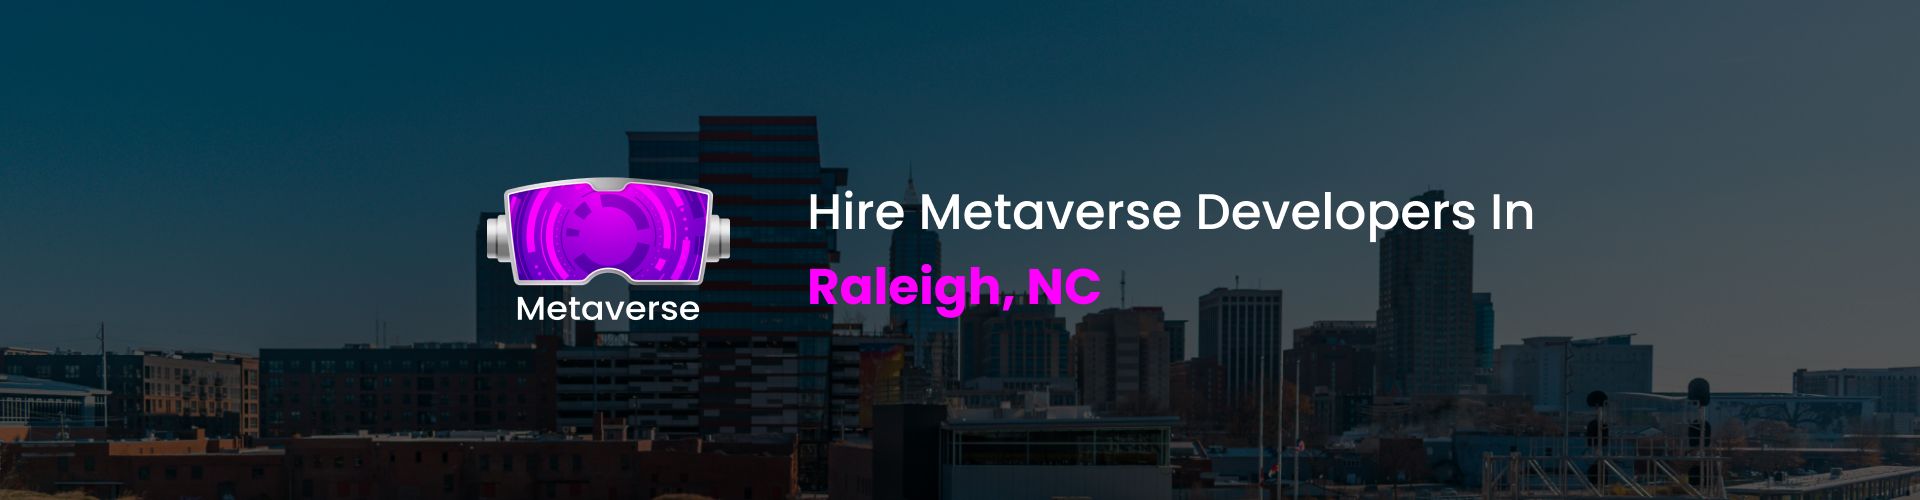 hire metaverse developers in raleigh